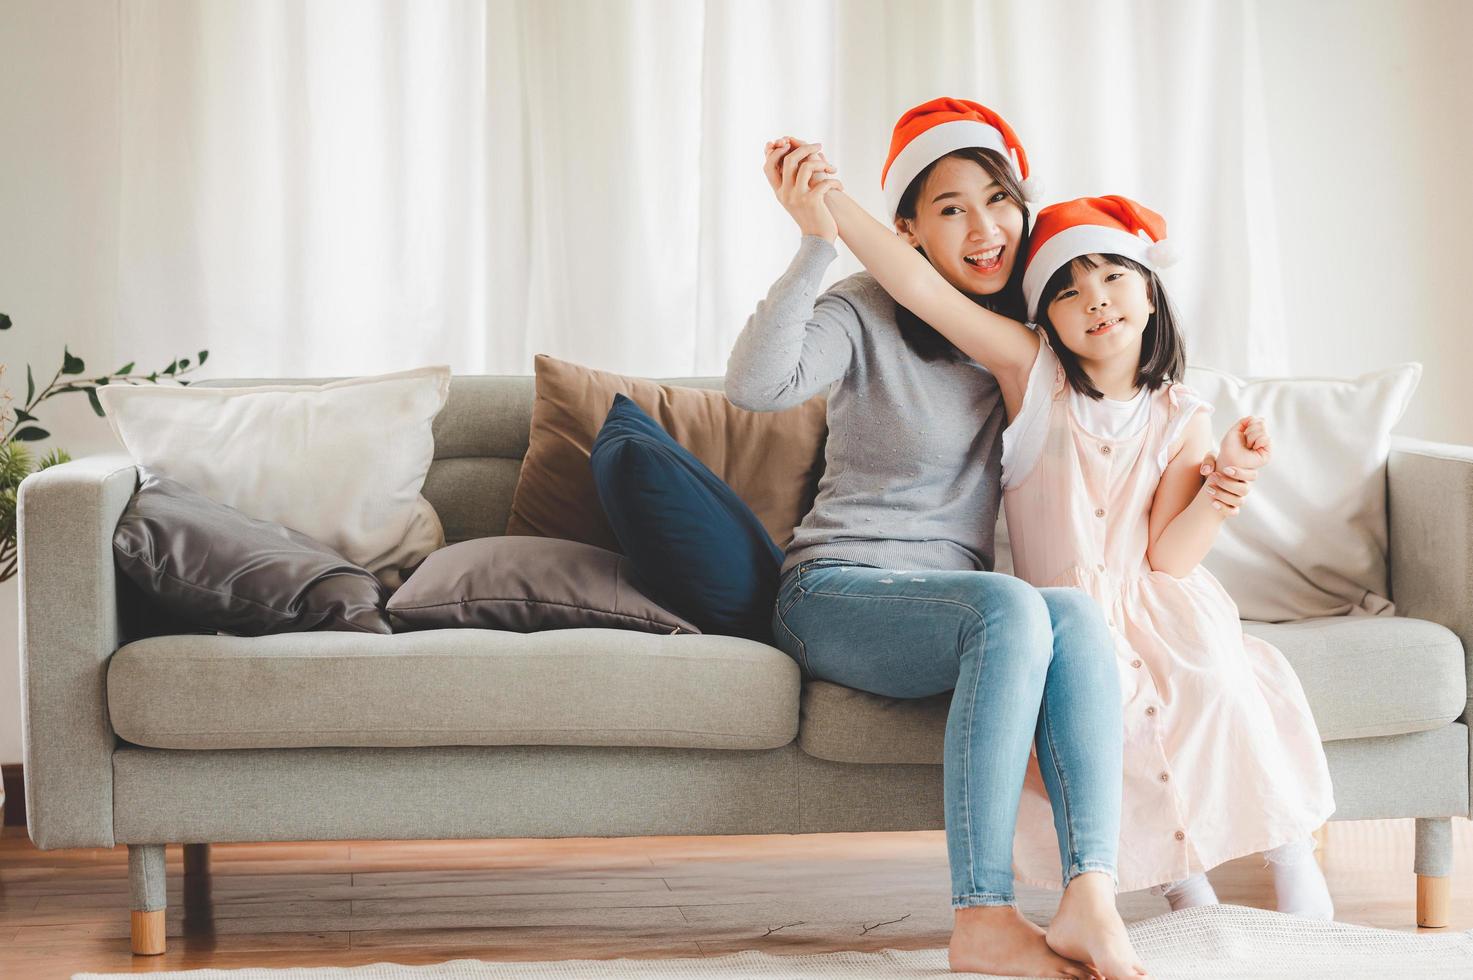 Mom and daughter celebrating Christmas photo